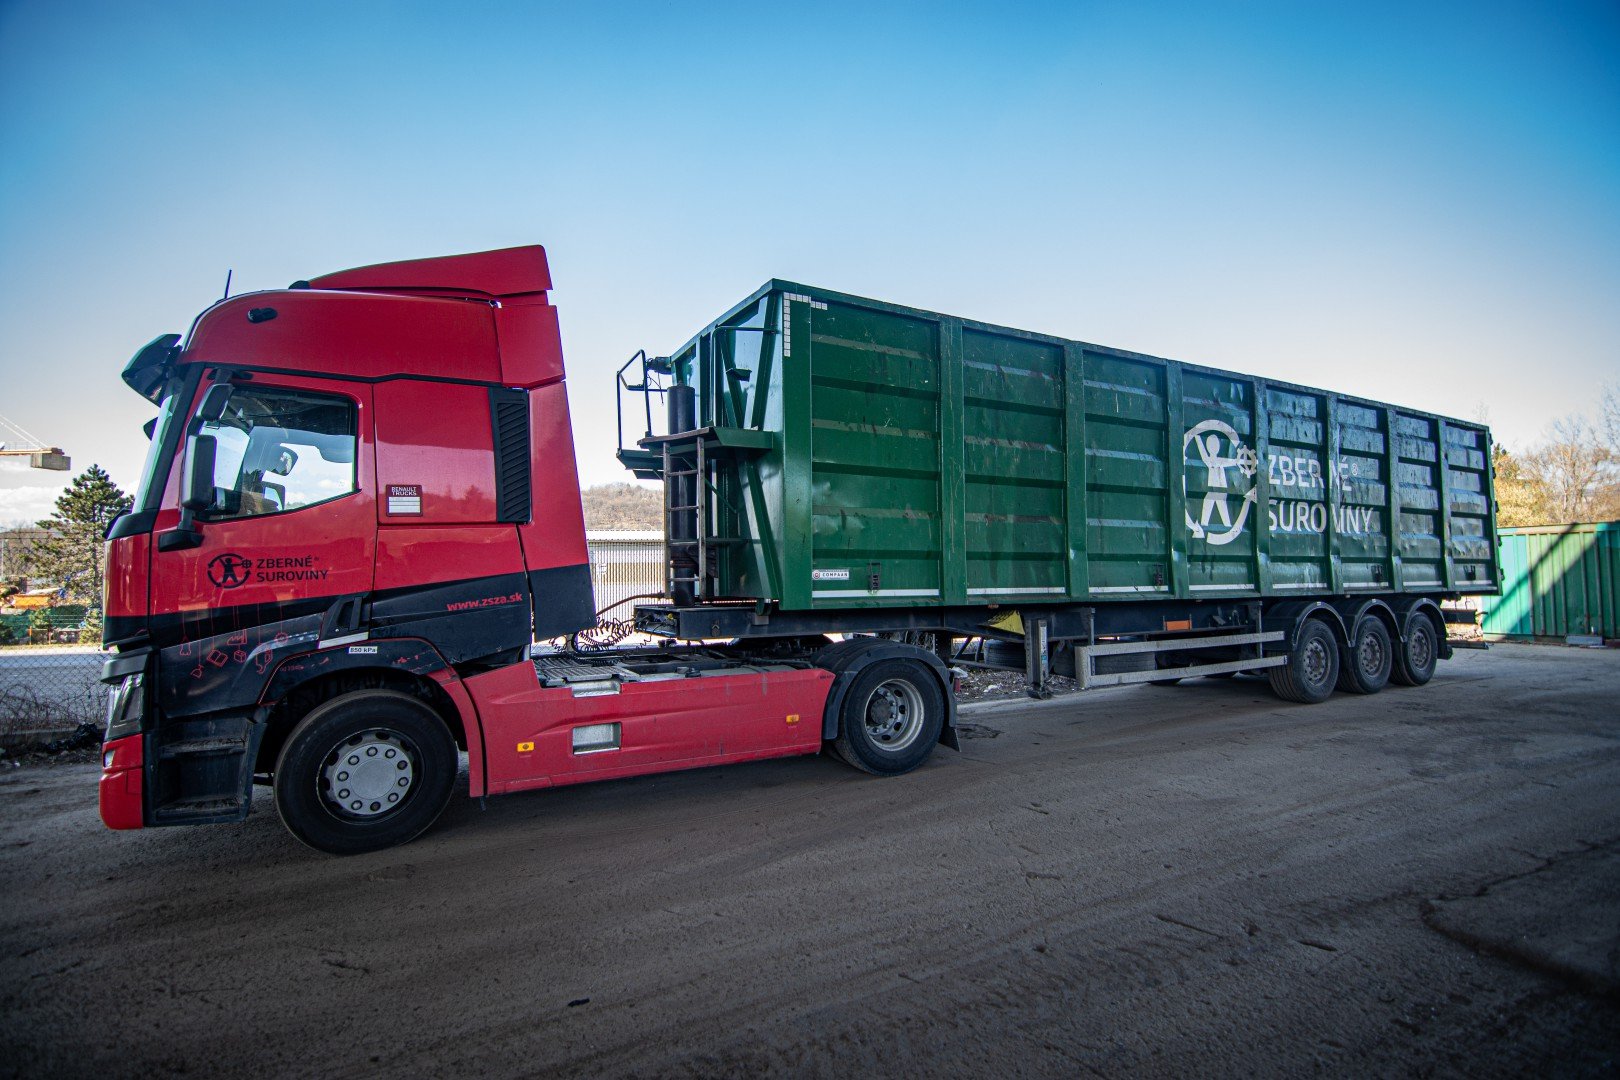 A comprehensive solution for the company's waste management